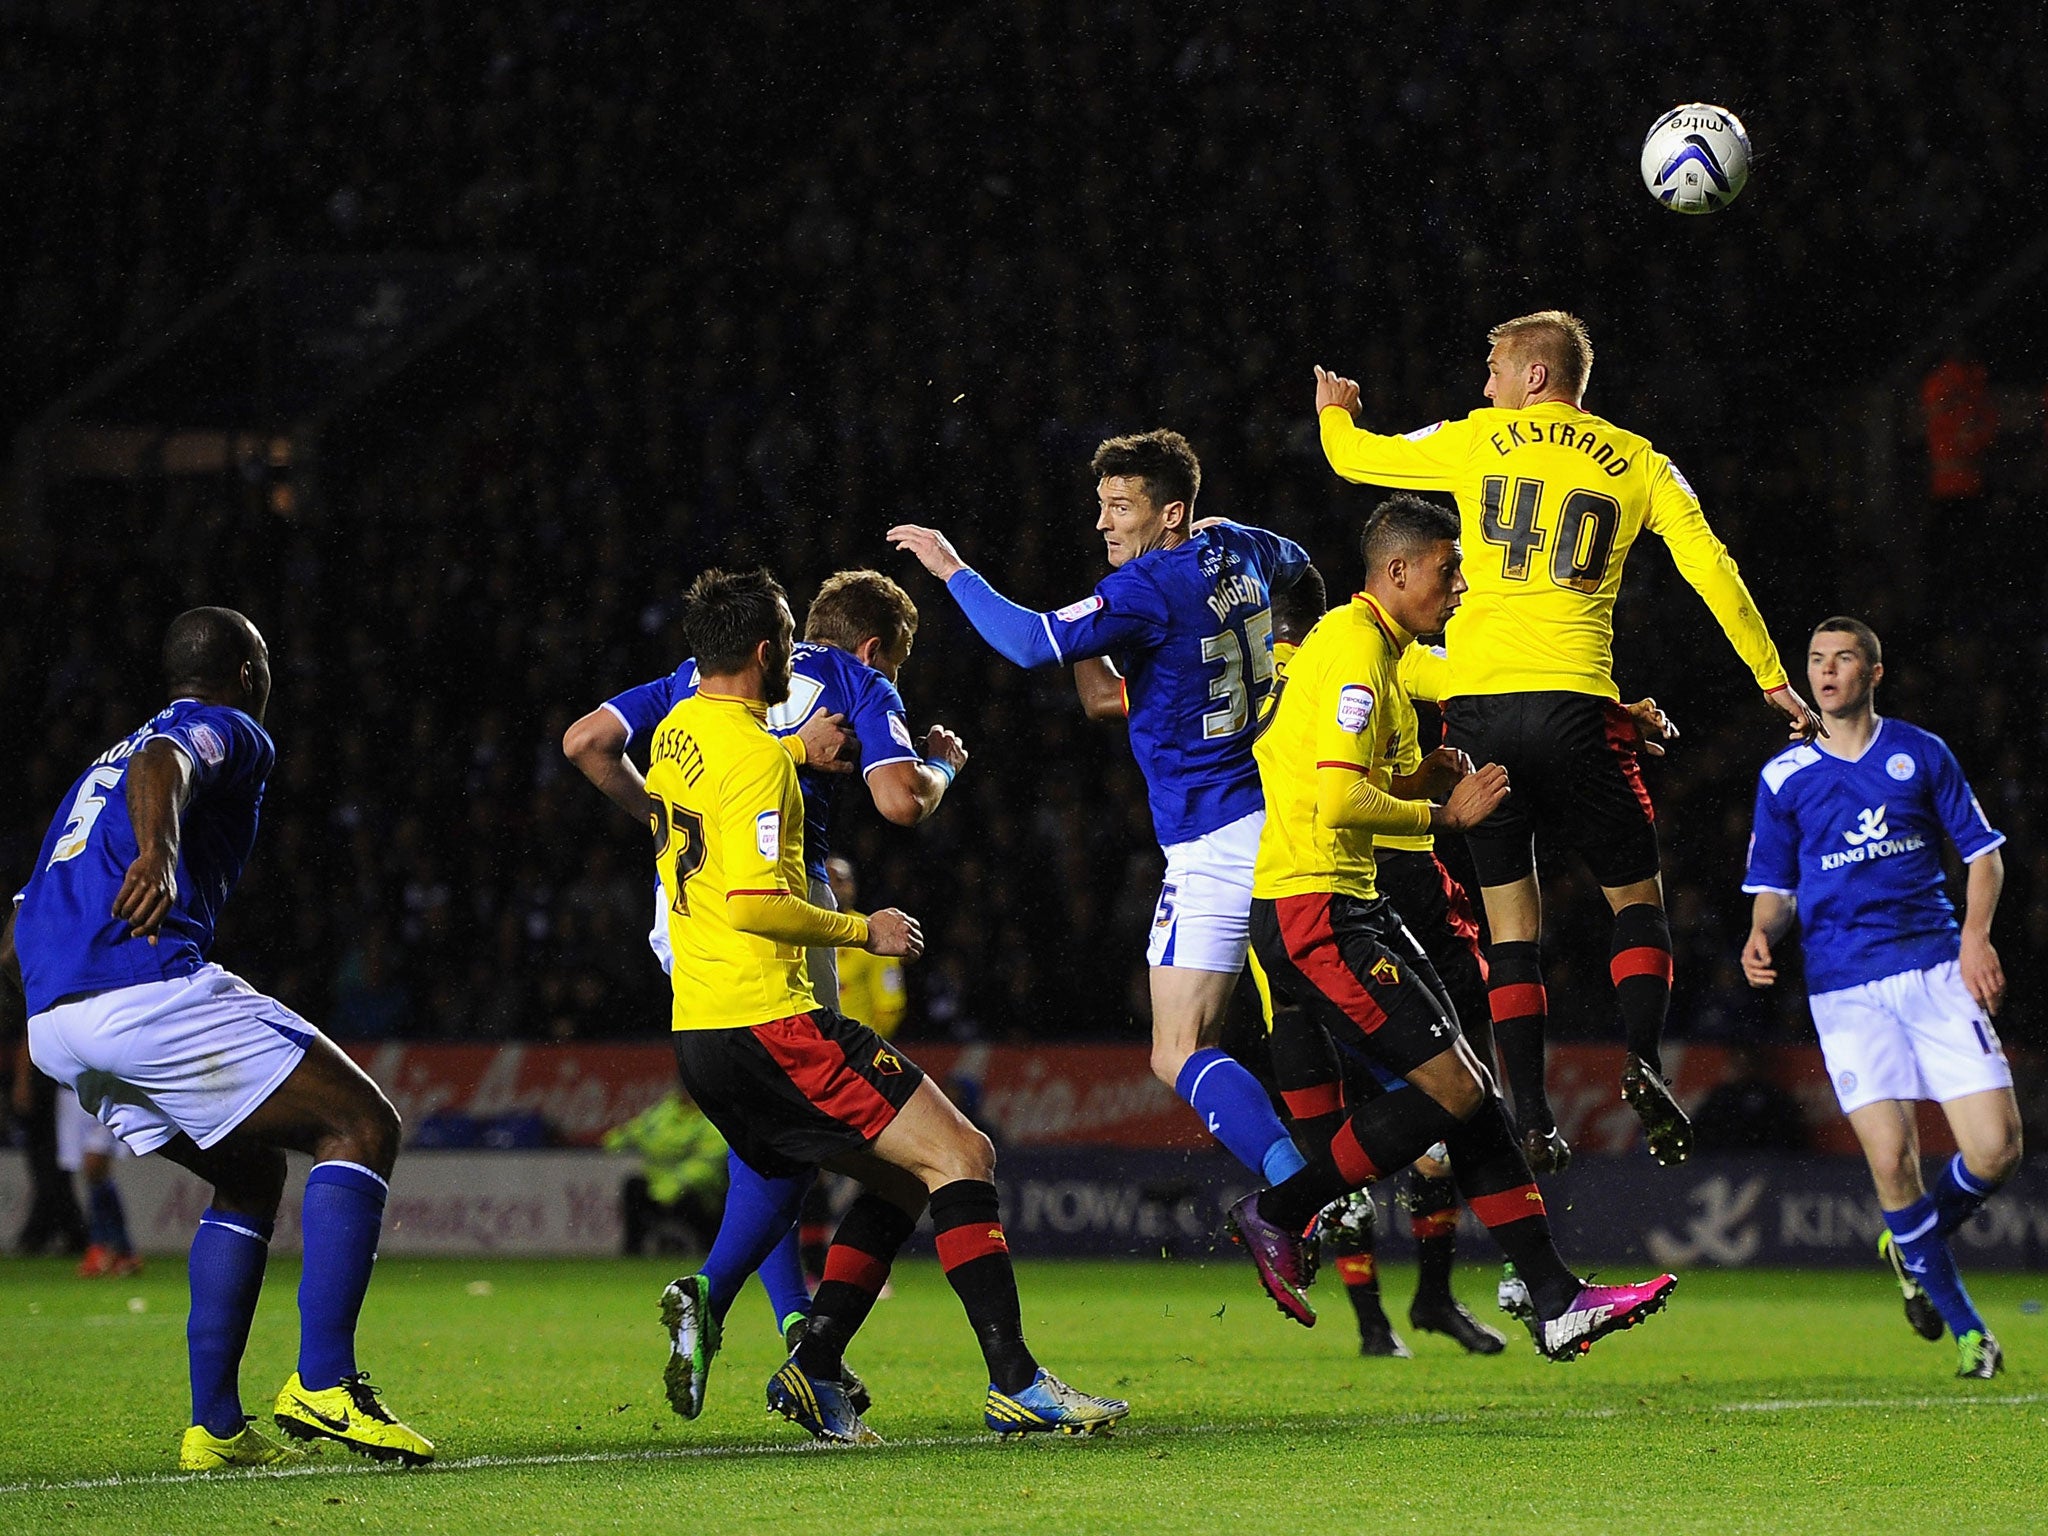 David Nugent scores the goal that separates the two teams